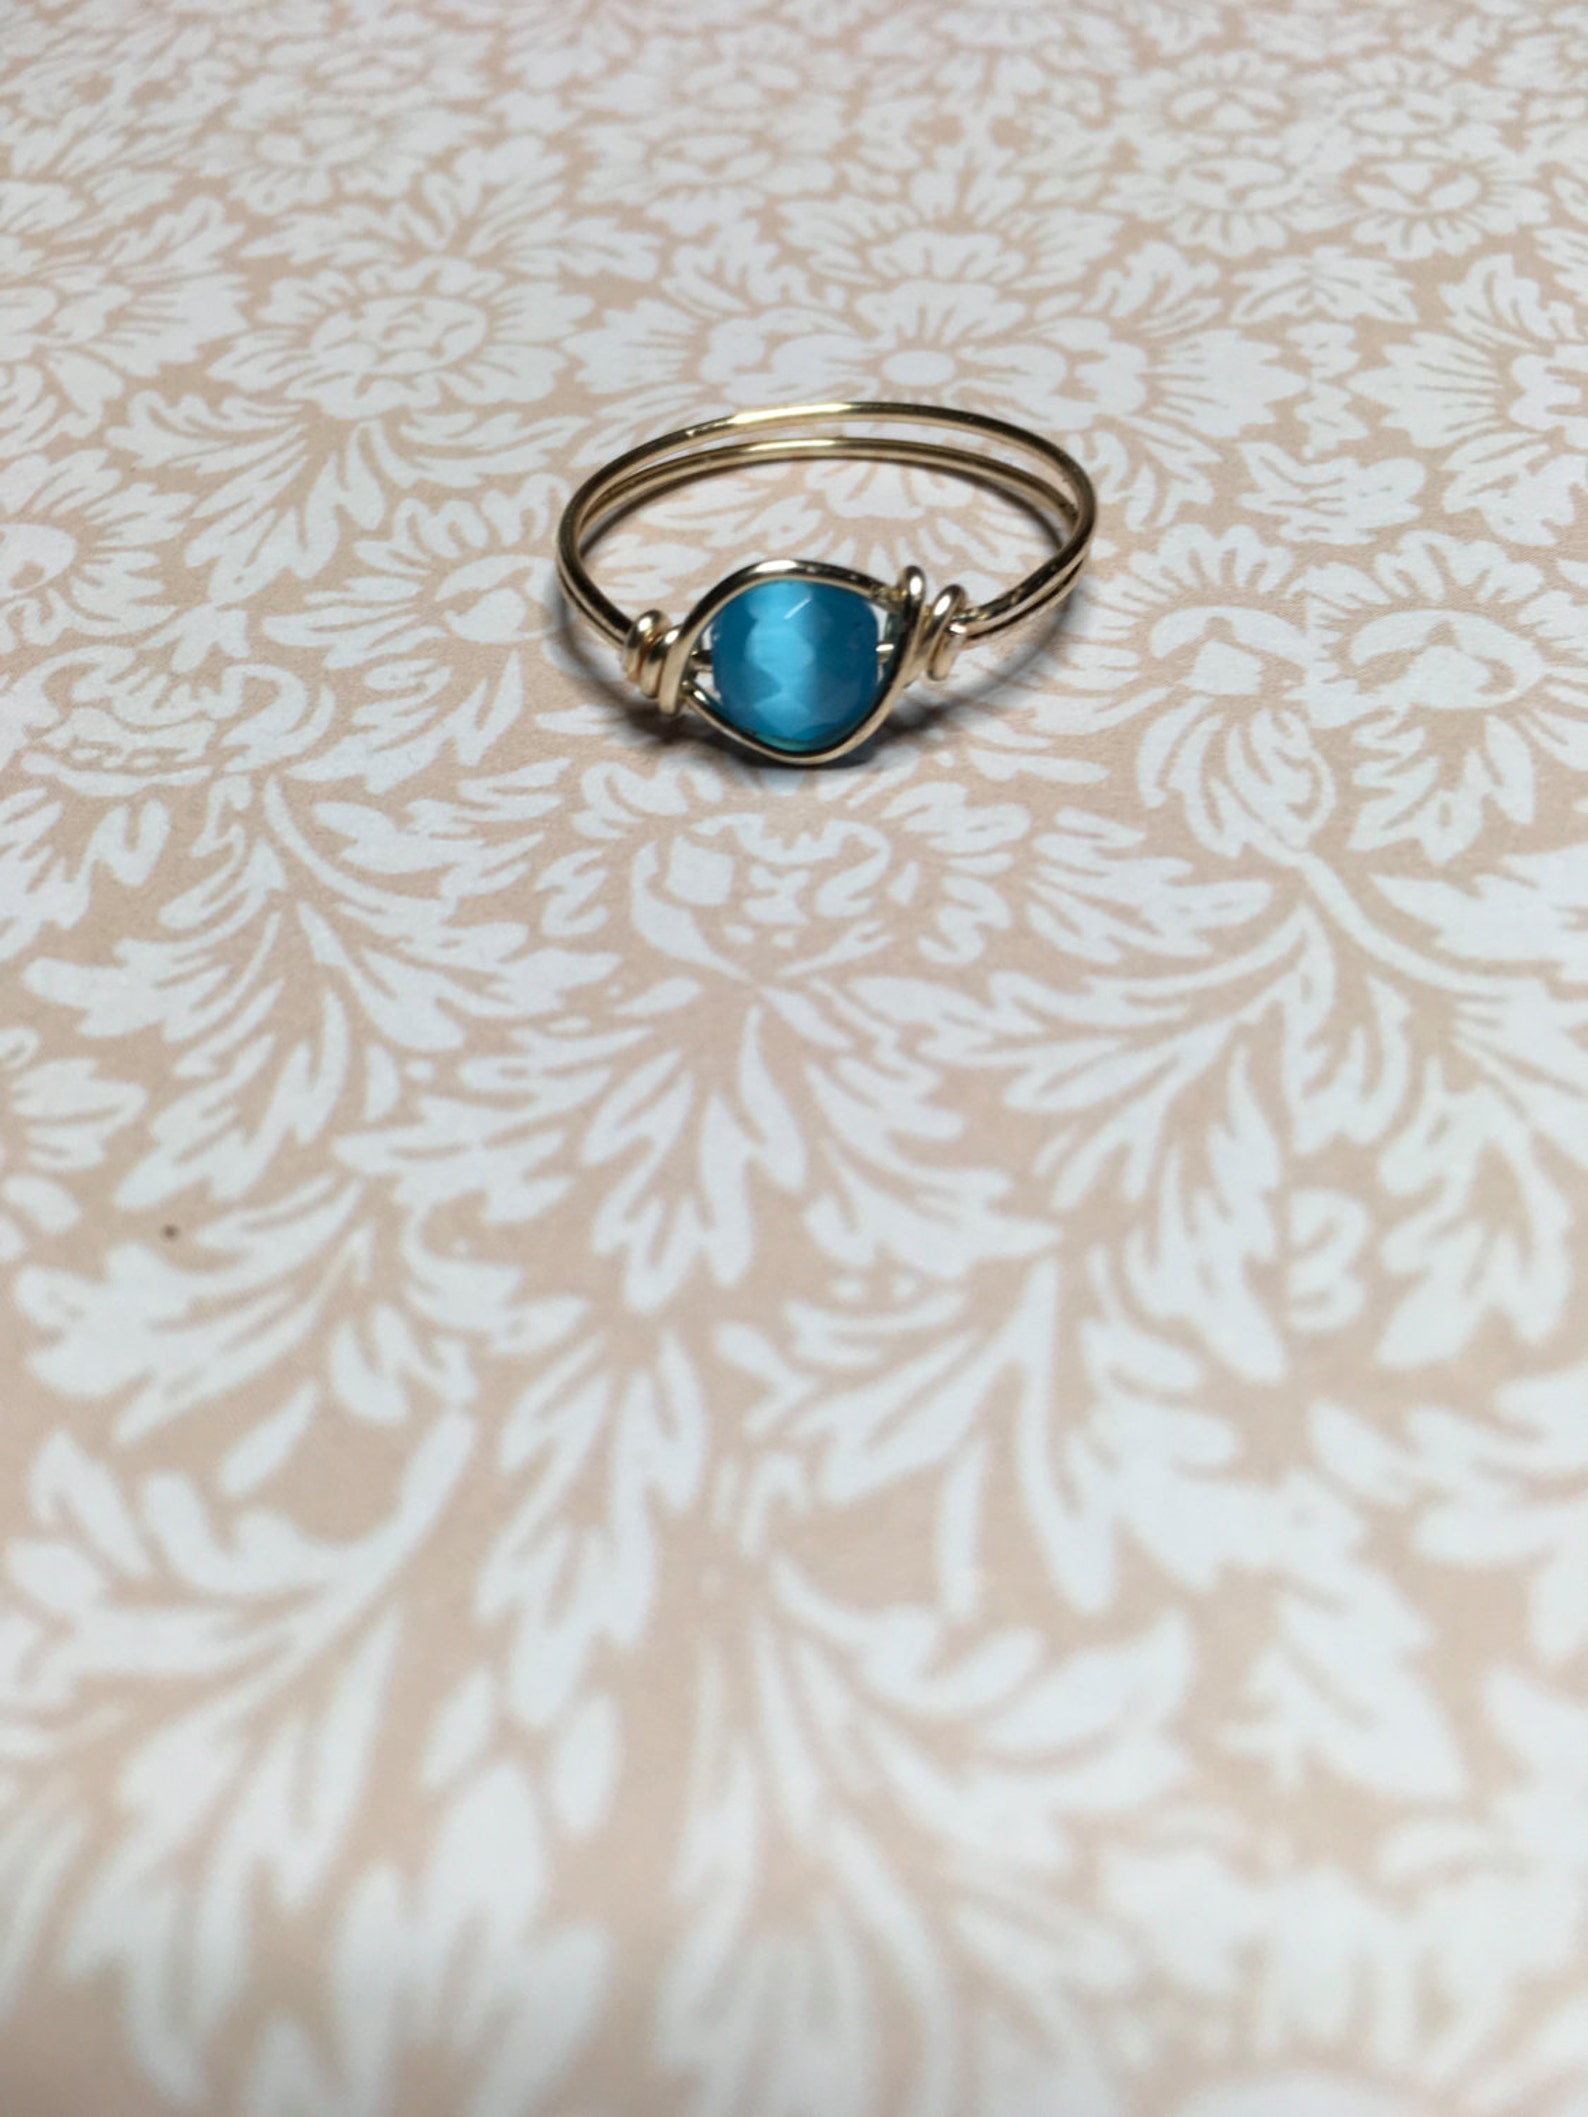 Faceted blue cats eye ring | Etsy